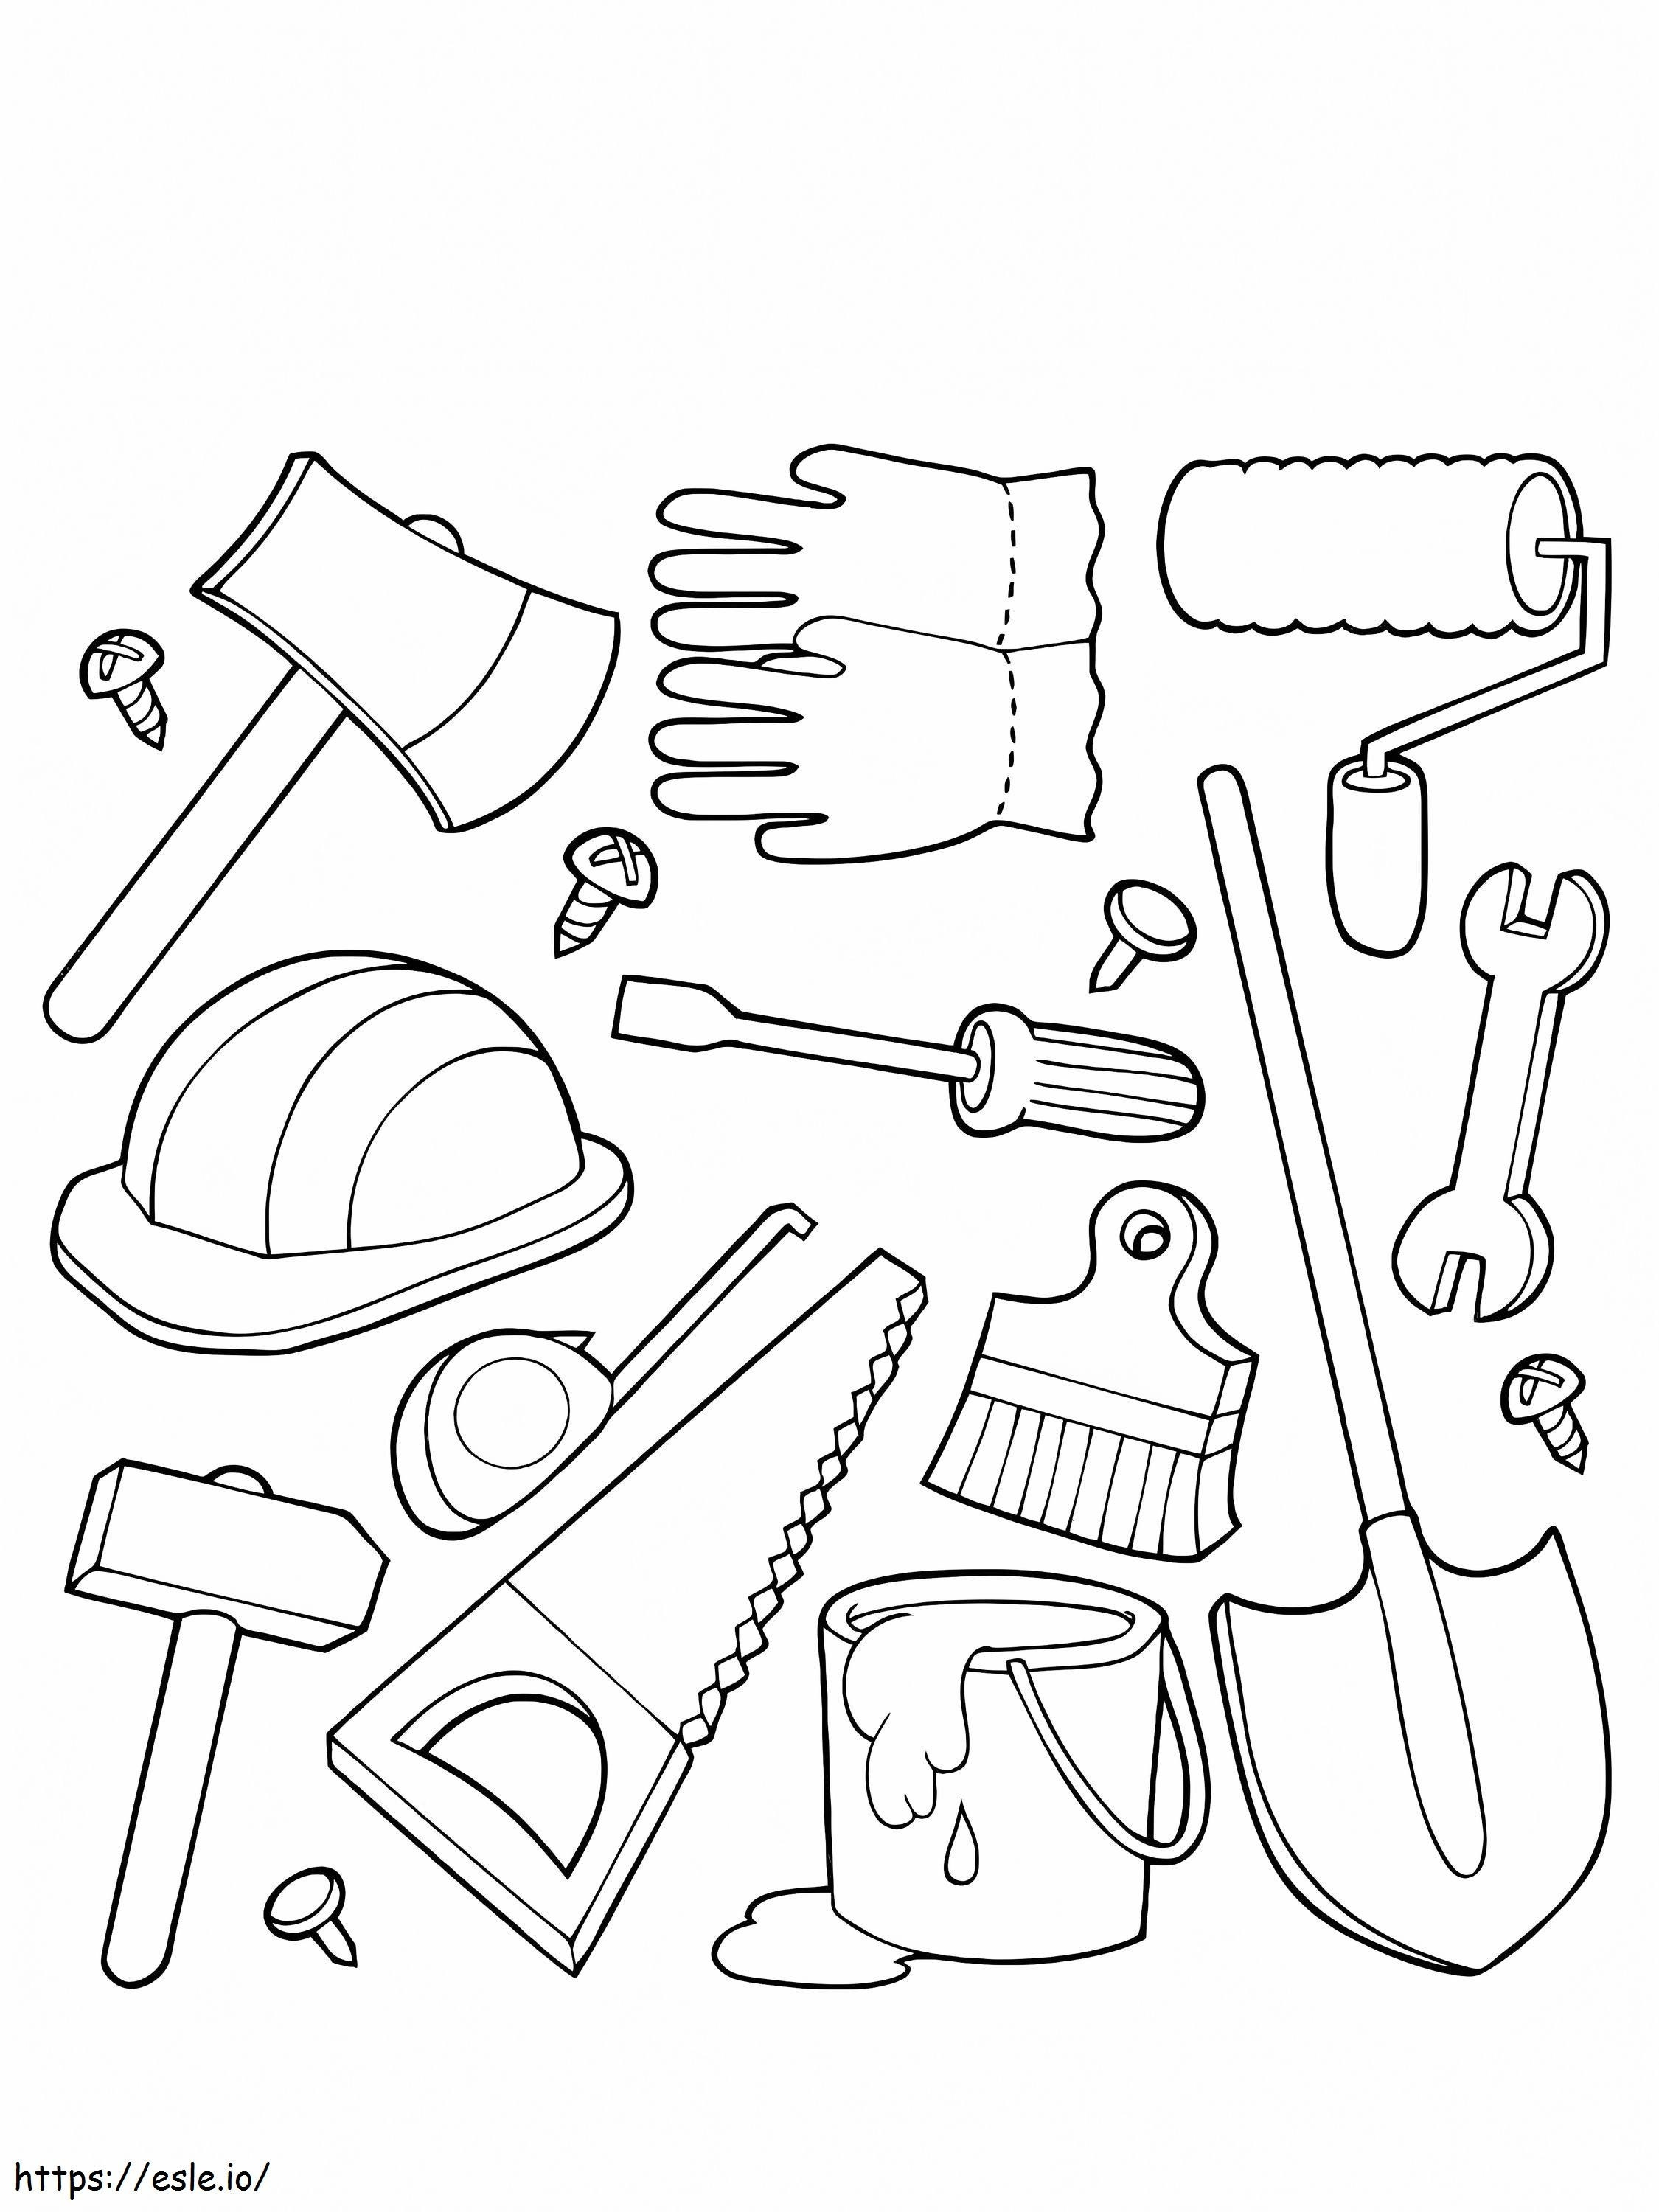 Tools Free Printable coloring page